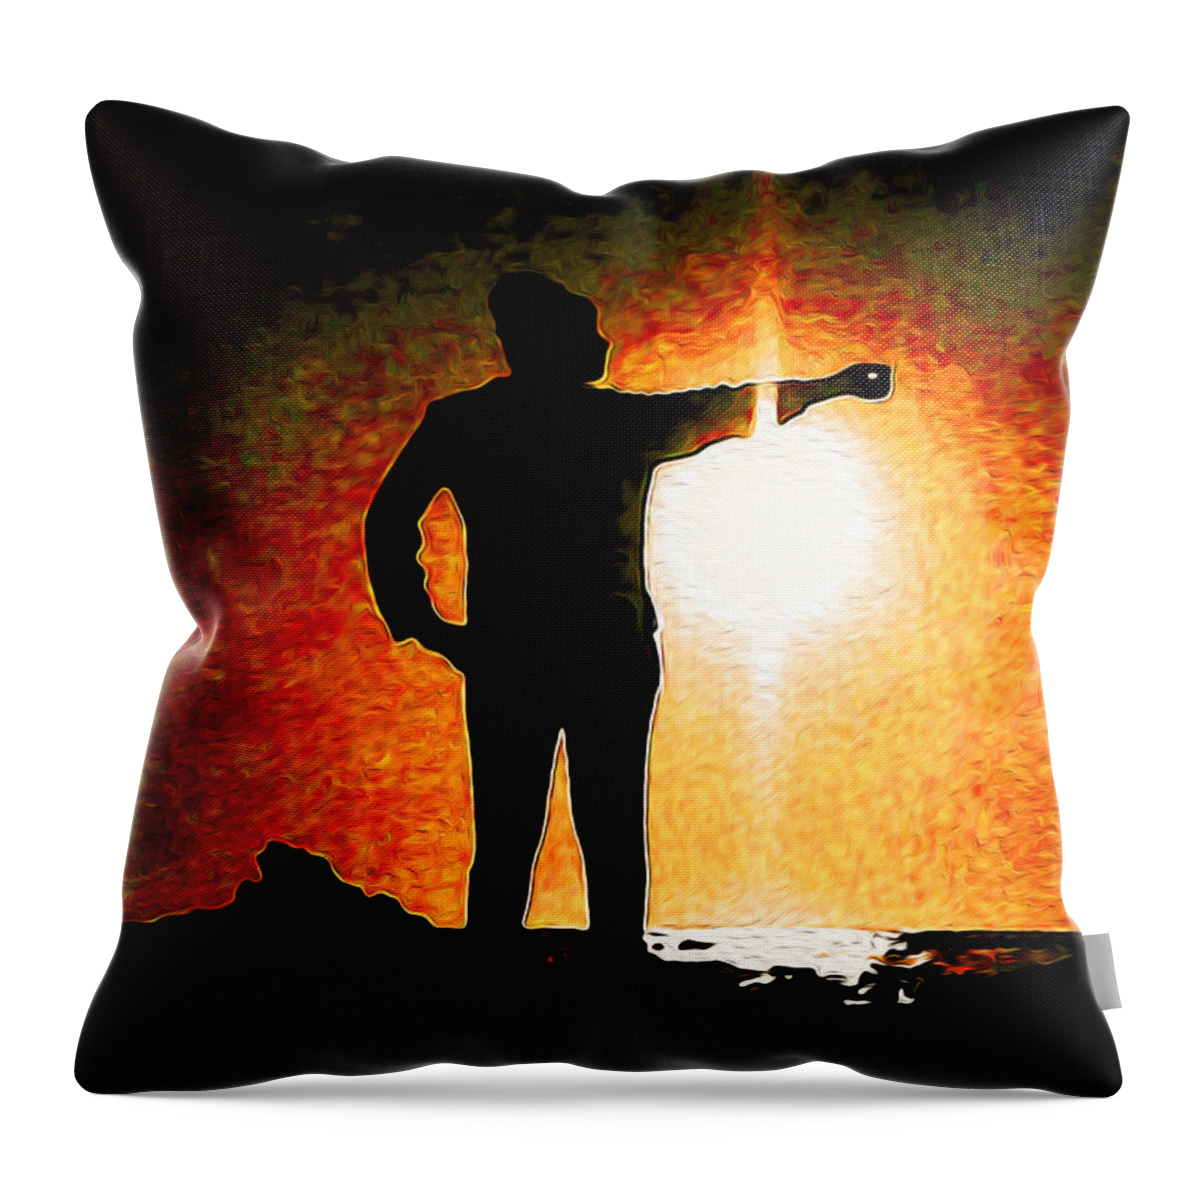 Native Americans Throw Pillow featuring the digital art Touching the Sun #1 by Joe Paradis